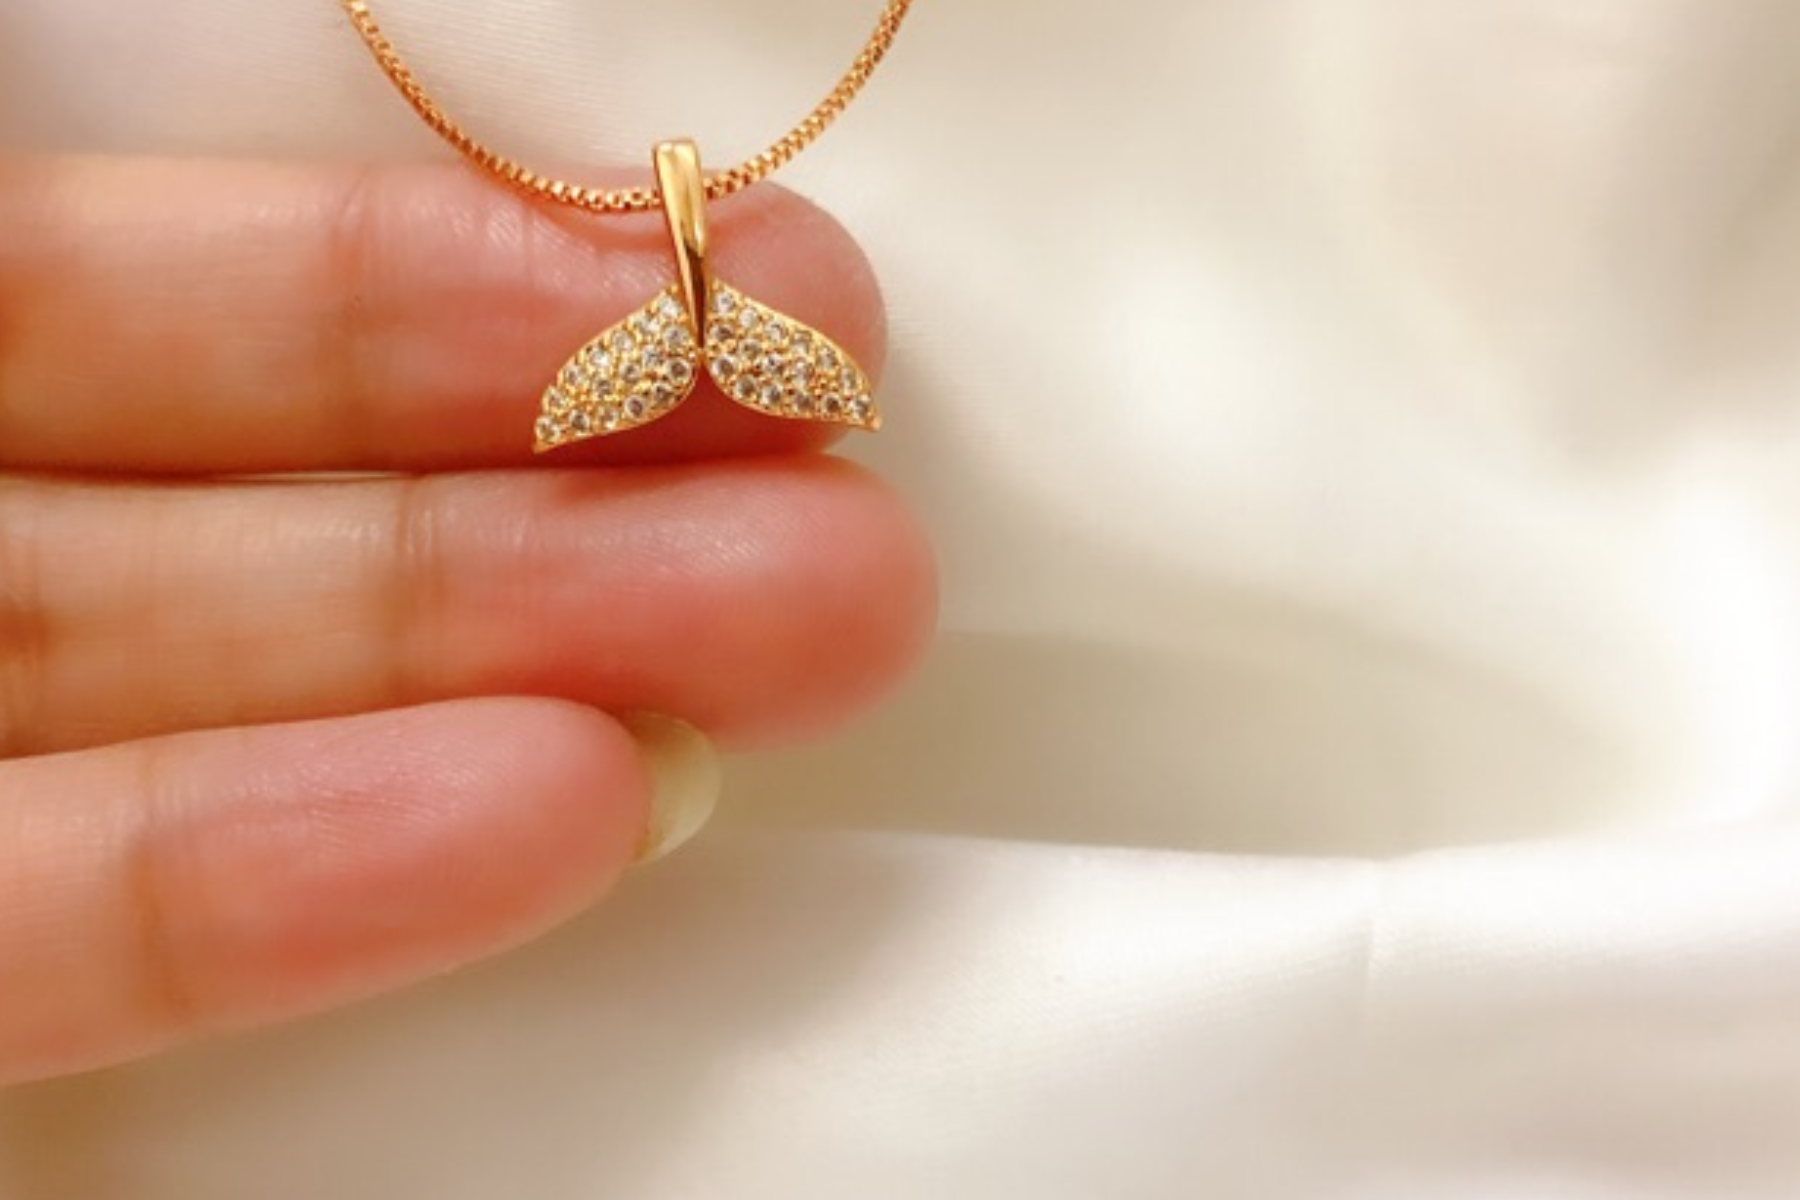 A woman's hand holding a gold mermaid pendant necklace